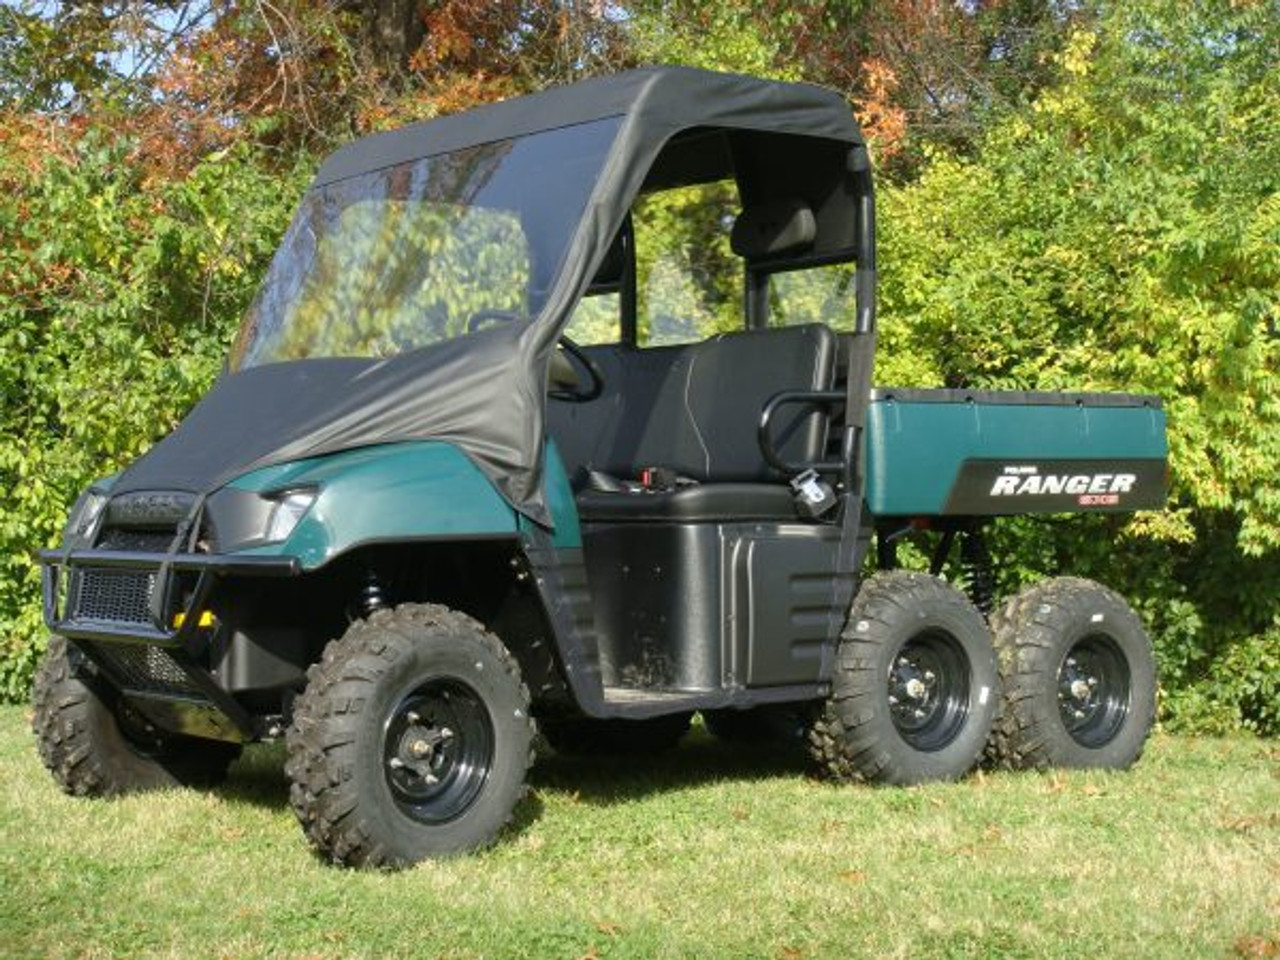 3 Star side x side Polaris Ranger 500 and 700 vinyl windshield roof and rear window side and front angle view